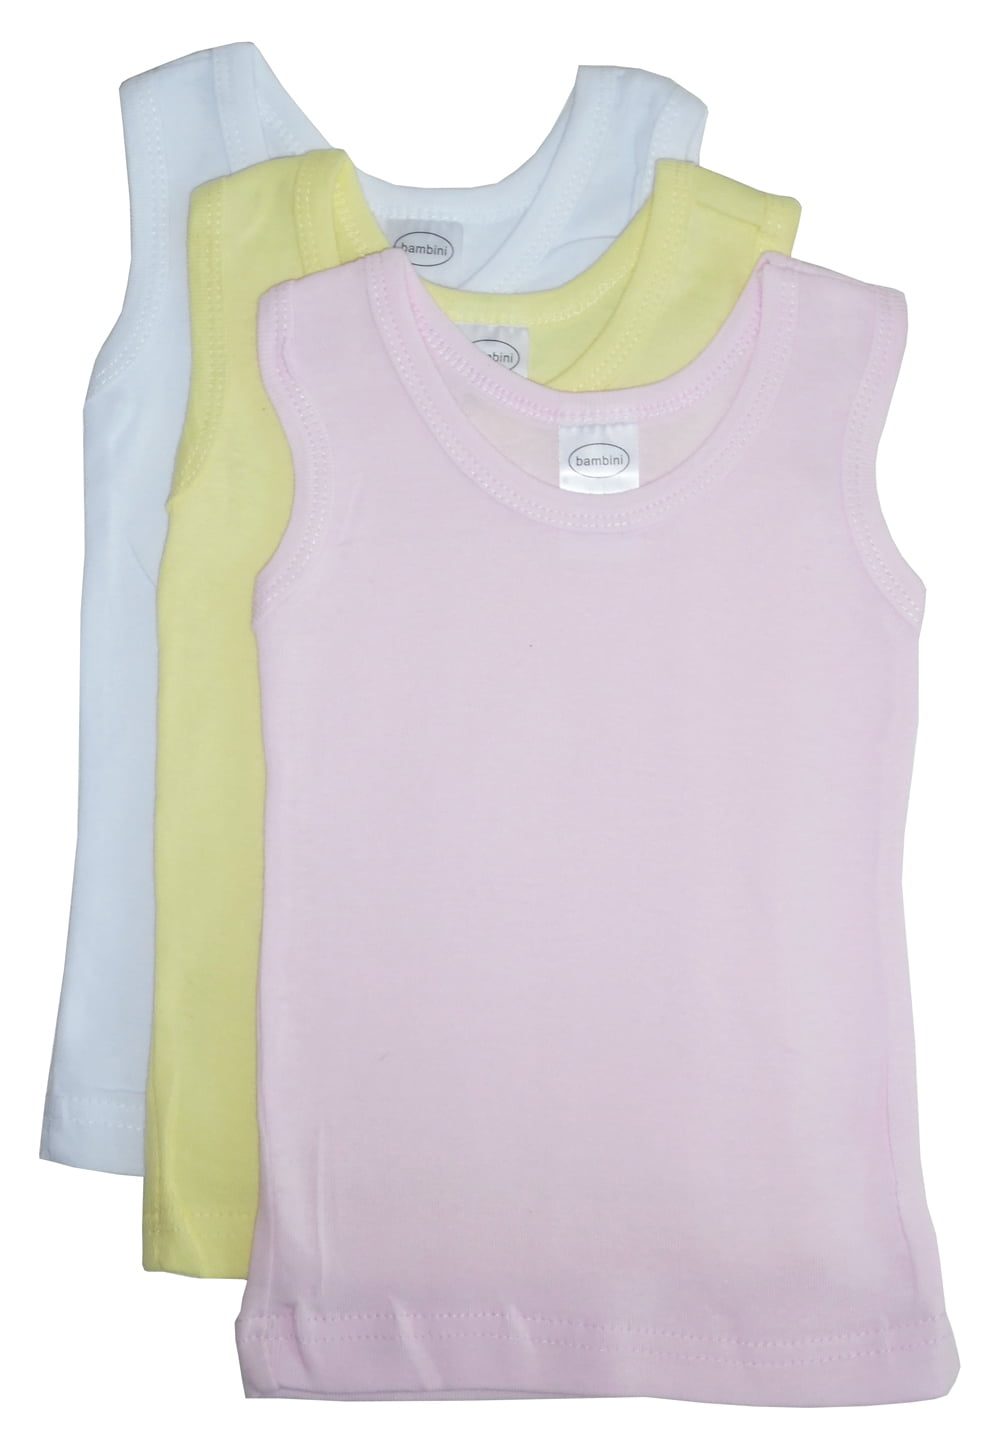 Bambini 100% Cotton Infant Girls Pastel Tank Top 3 Pack Baby Bodysuit Clothes 